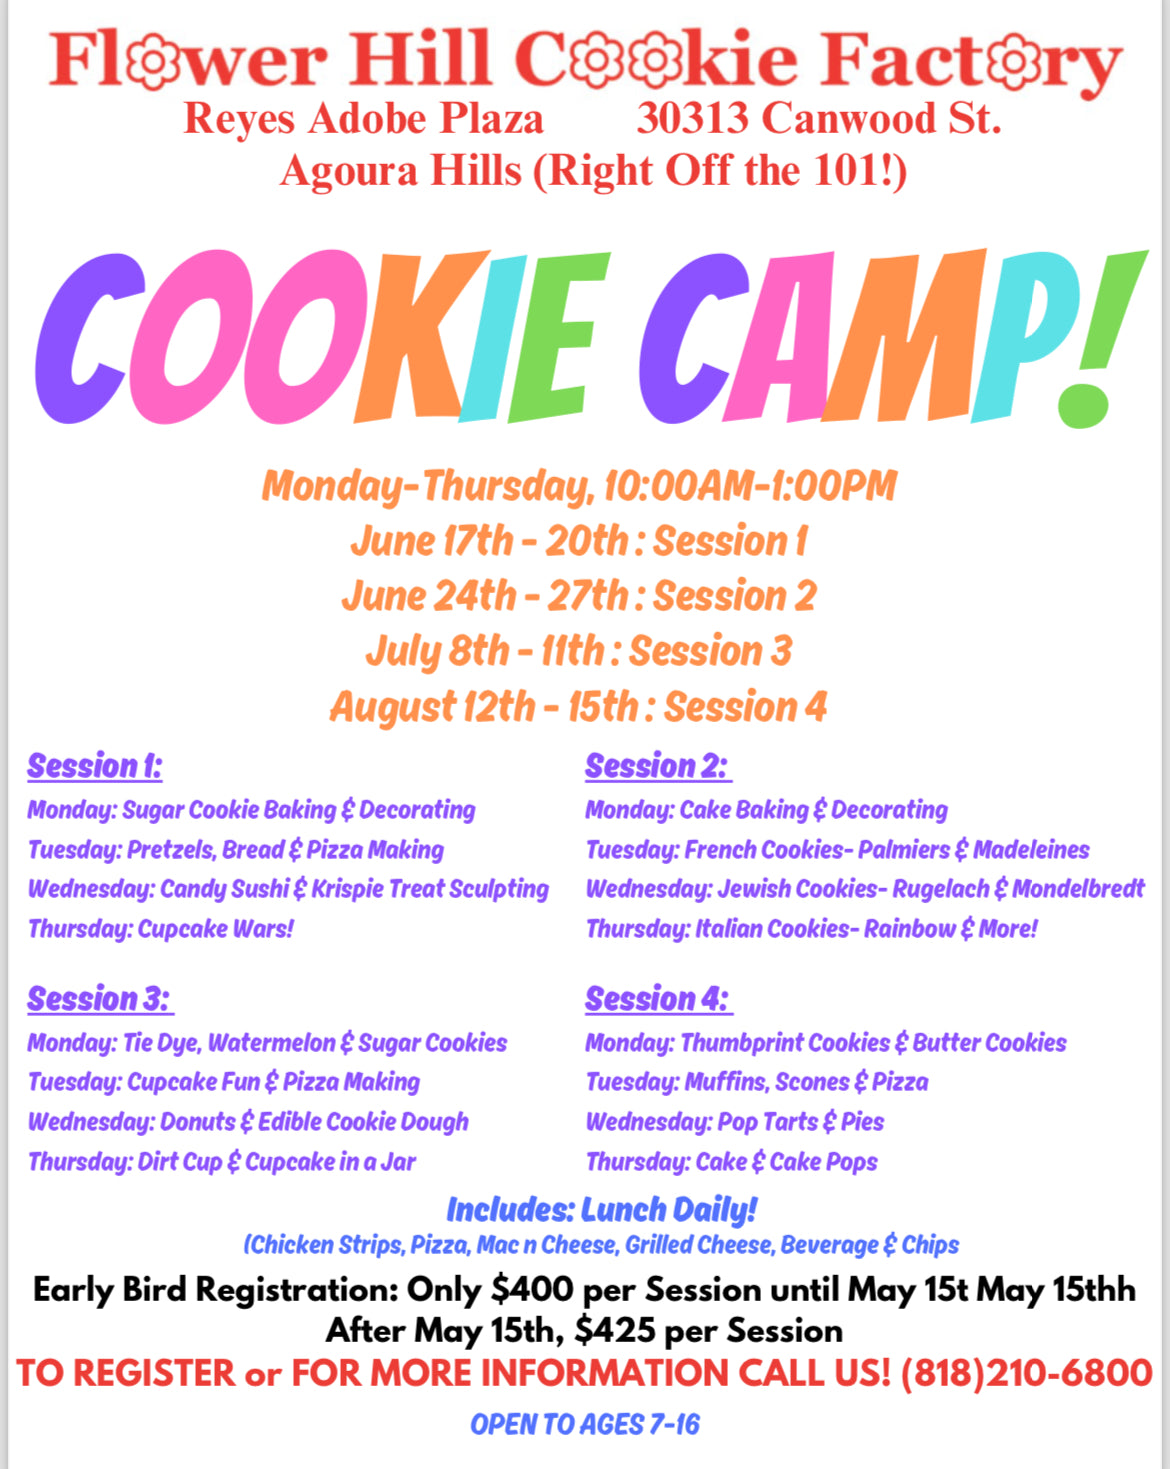 COOKIE CAMP